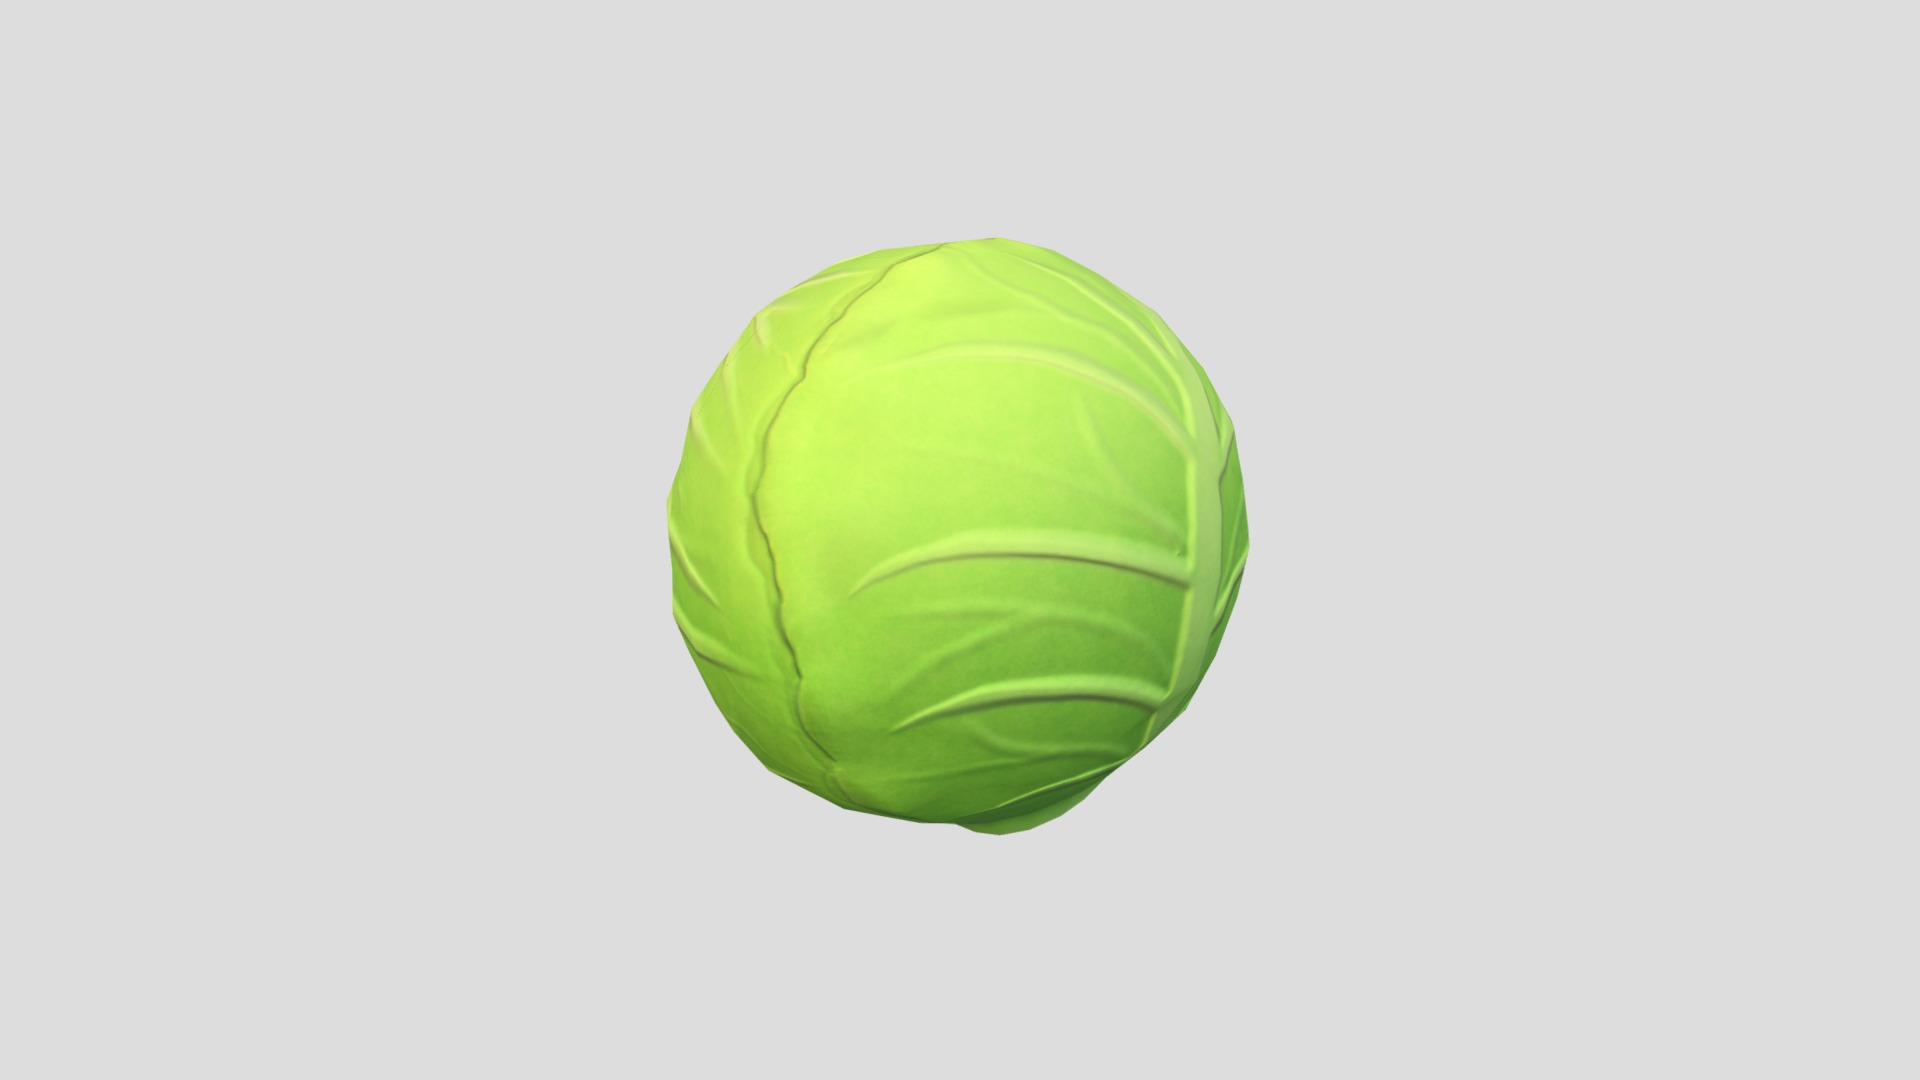 3D model Cabbage - This is a 3D model of the Cabbage. The 3D model is about a green ball on a white background.